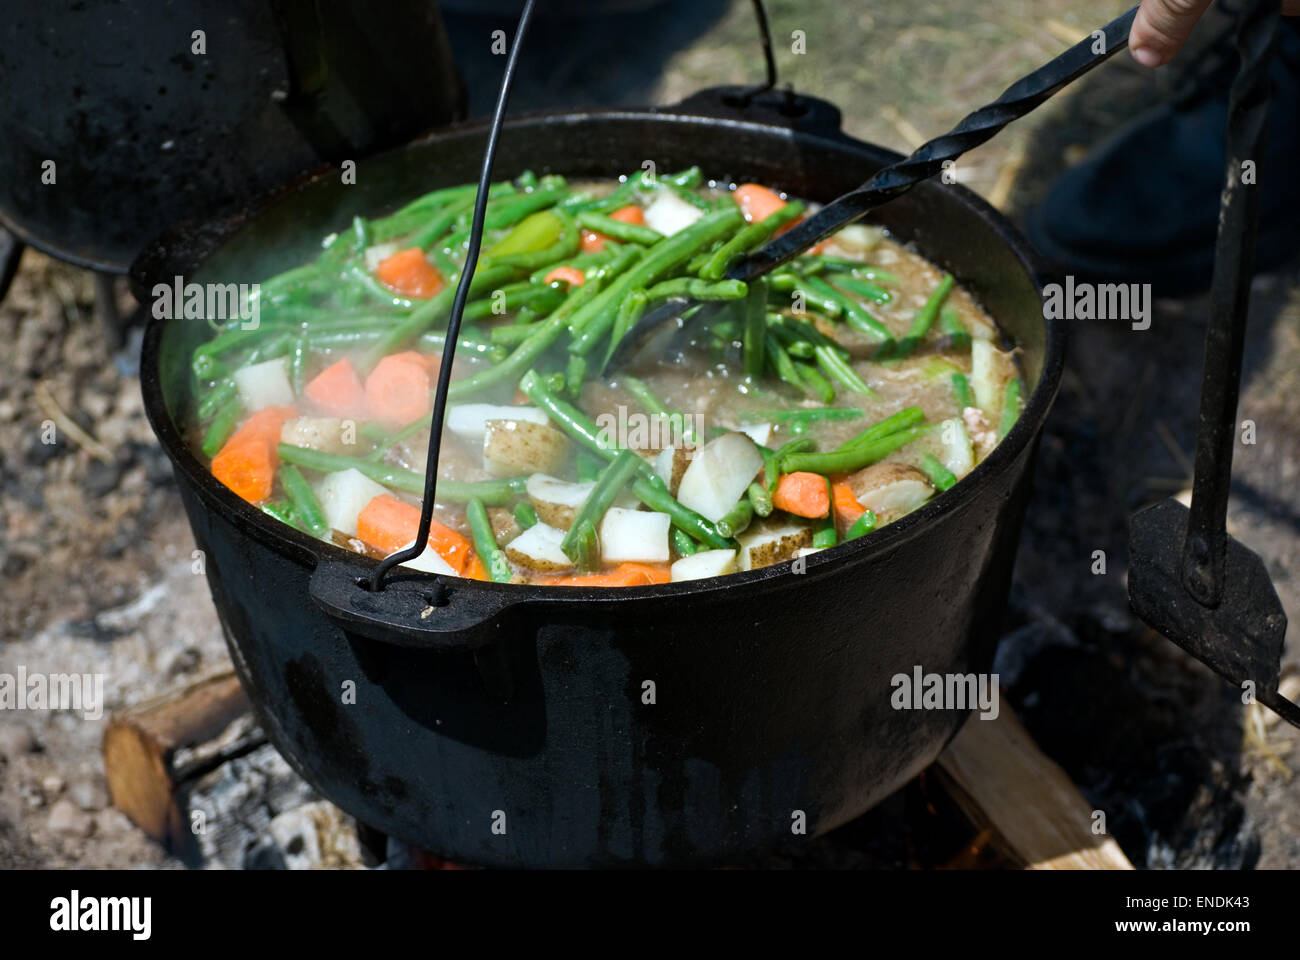 Homemade beef stew simmering in black kettle over an open fire. Stock Photo